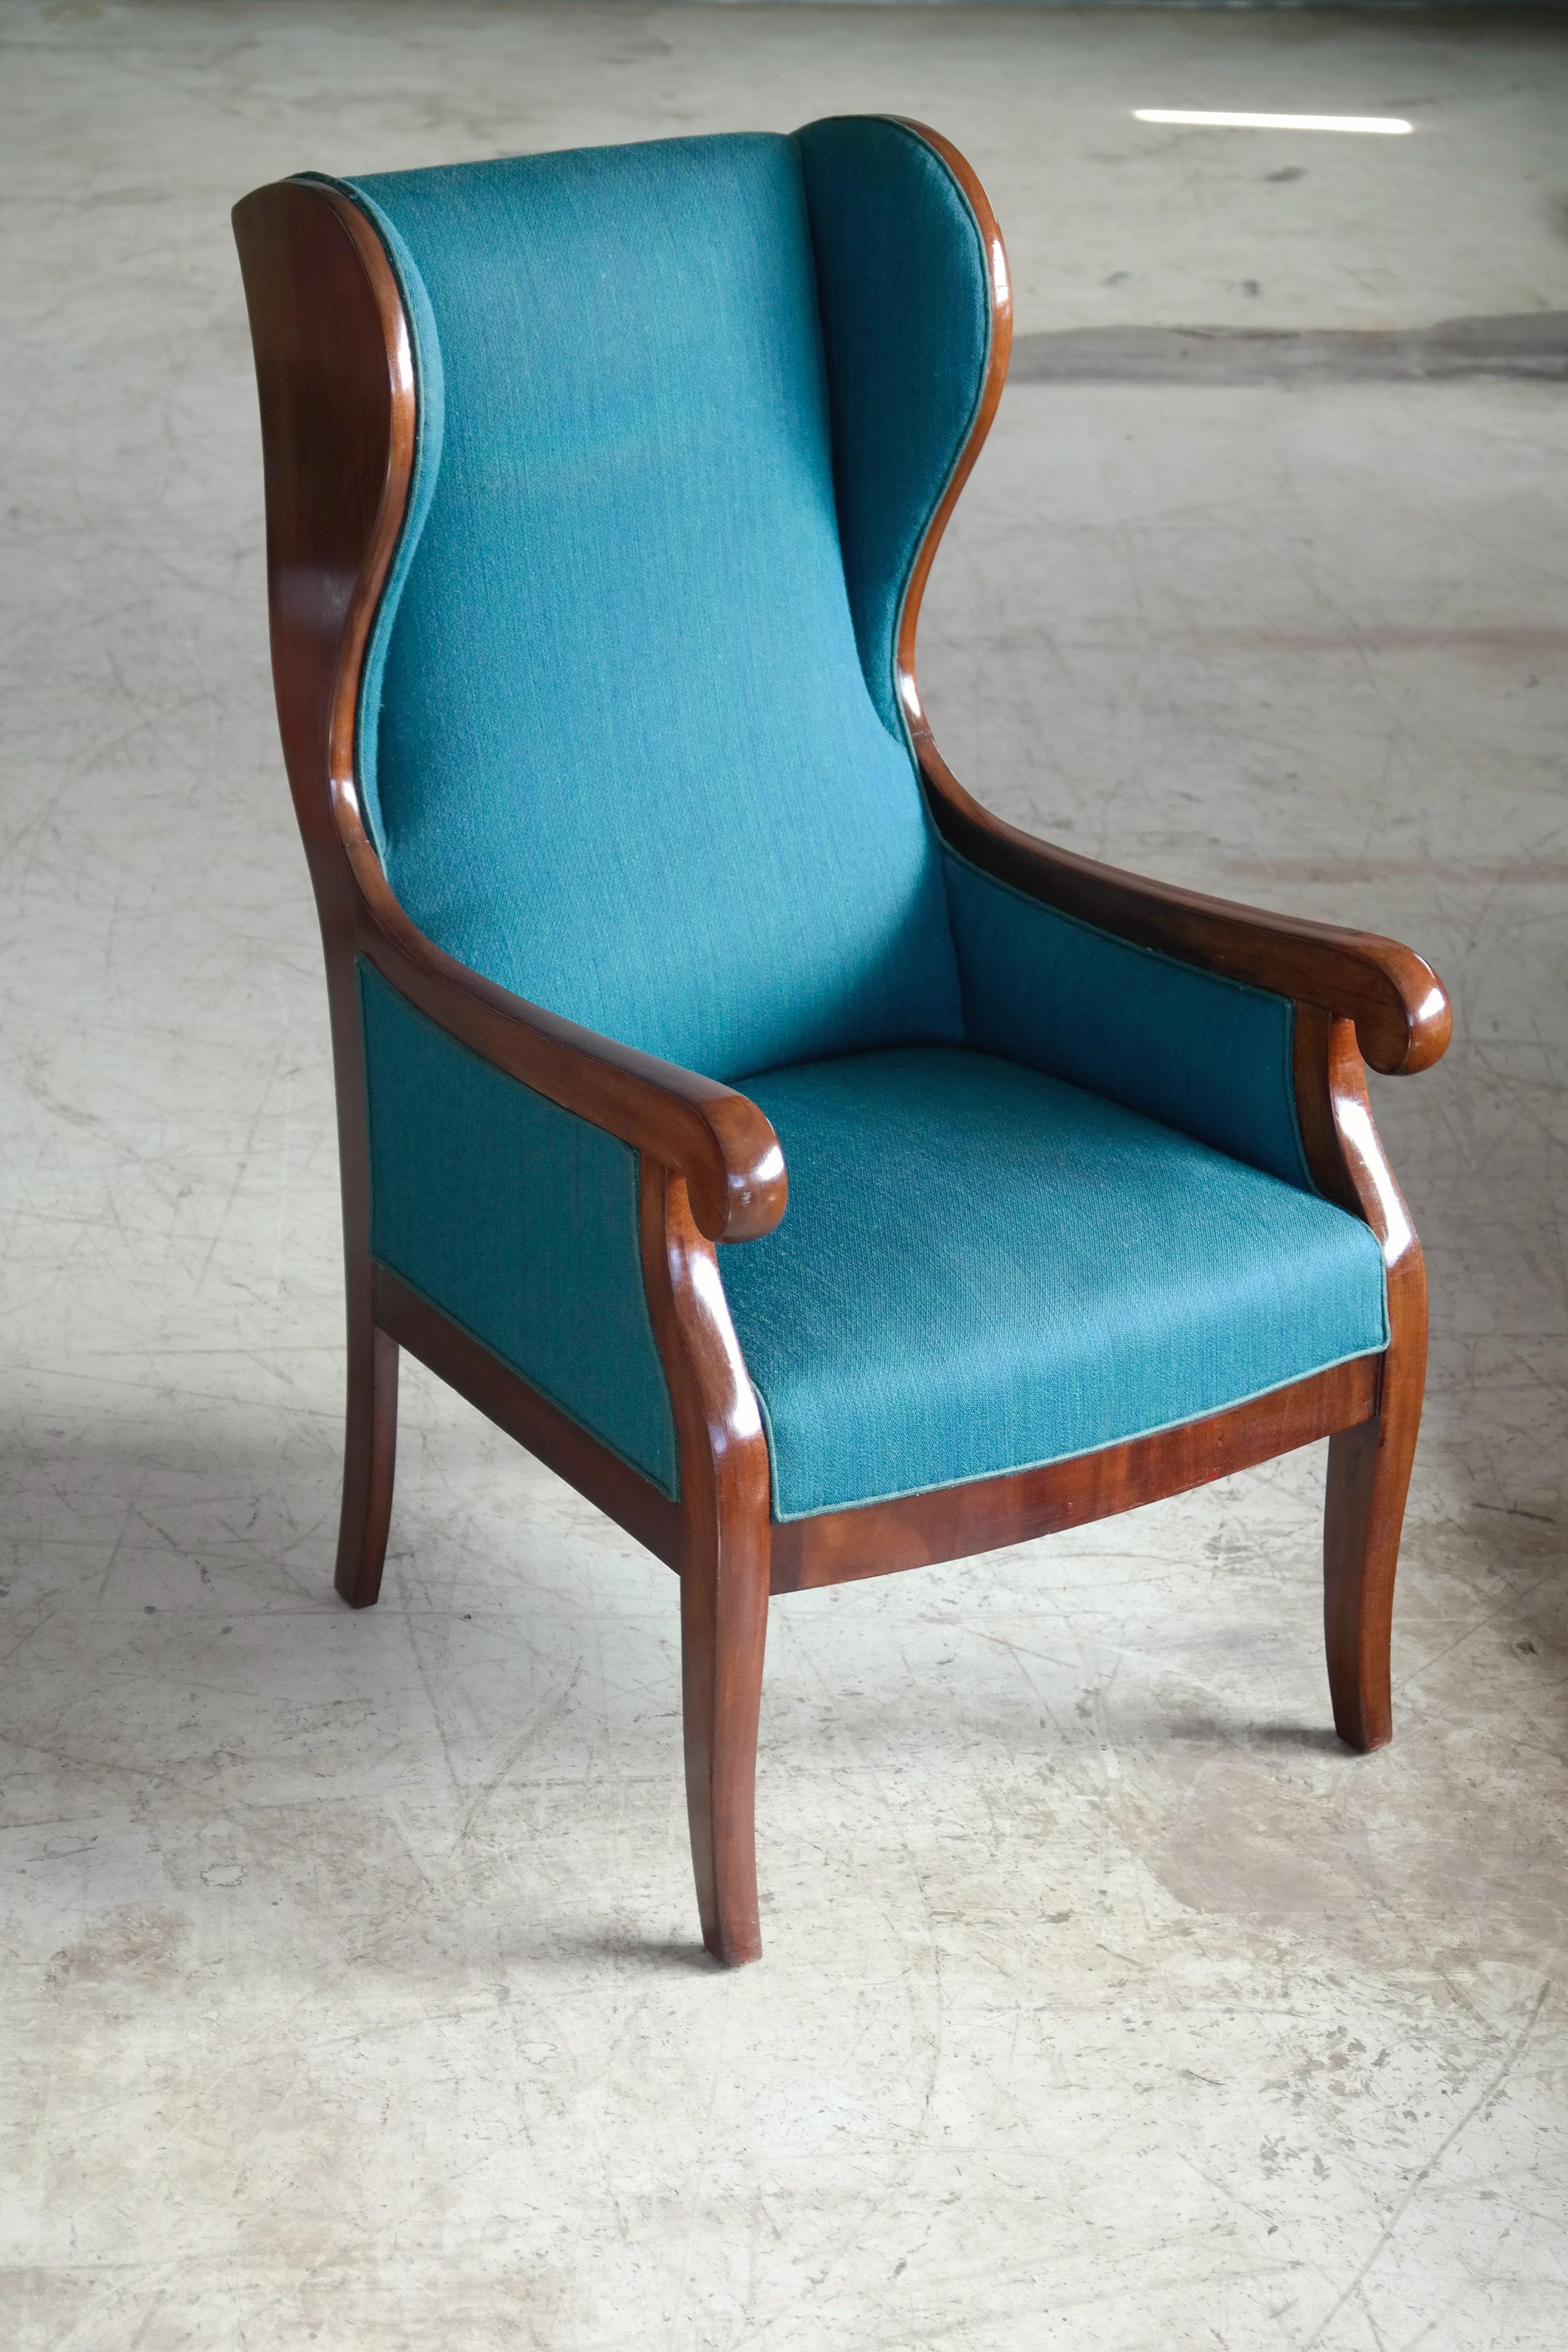 1940 wingback chair